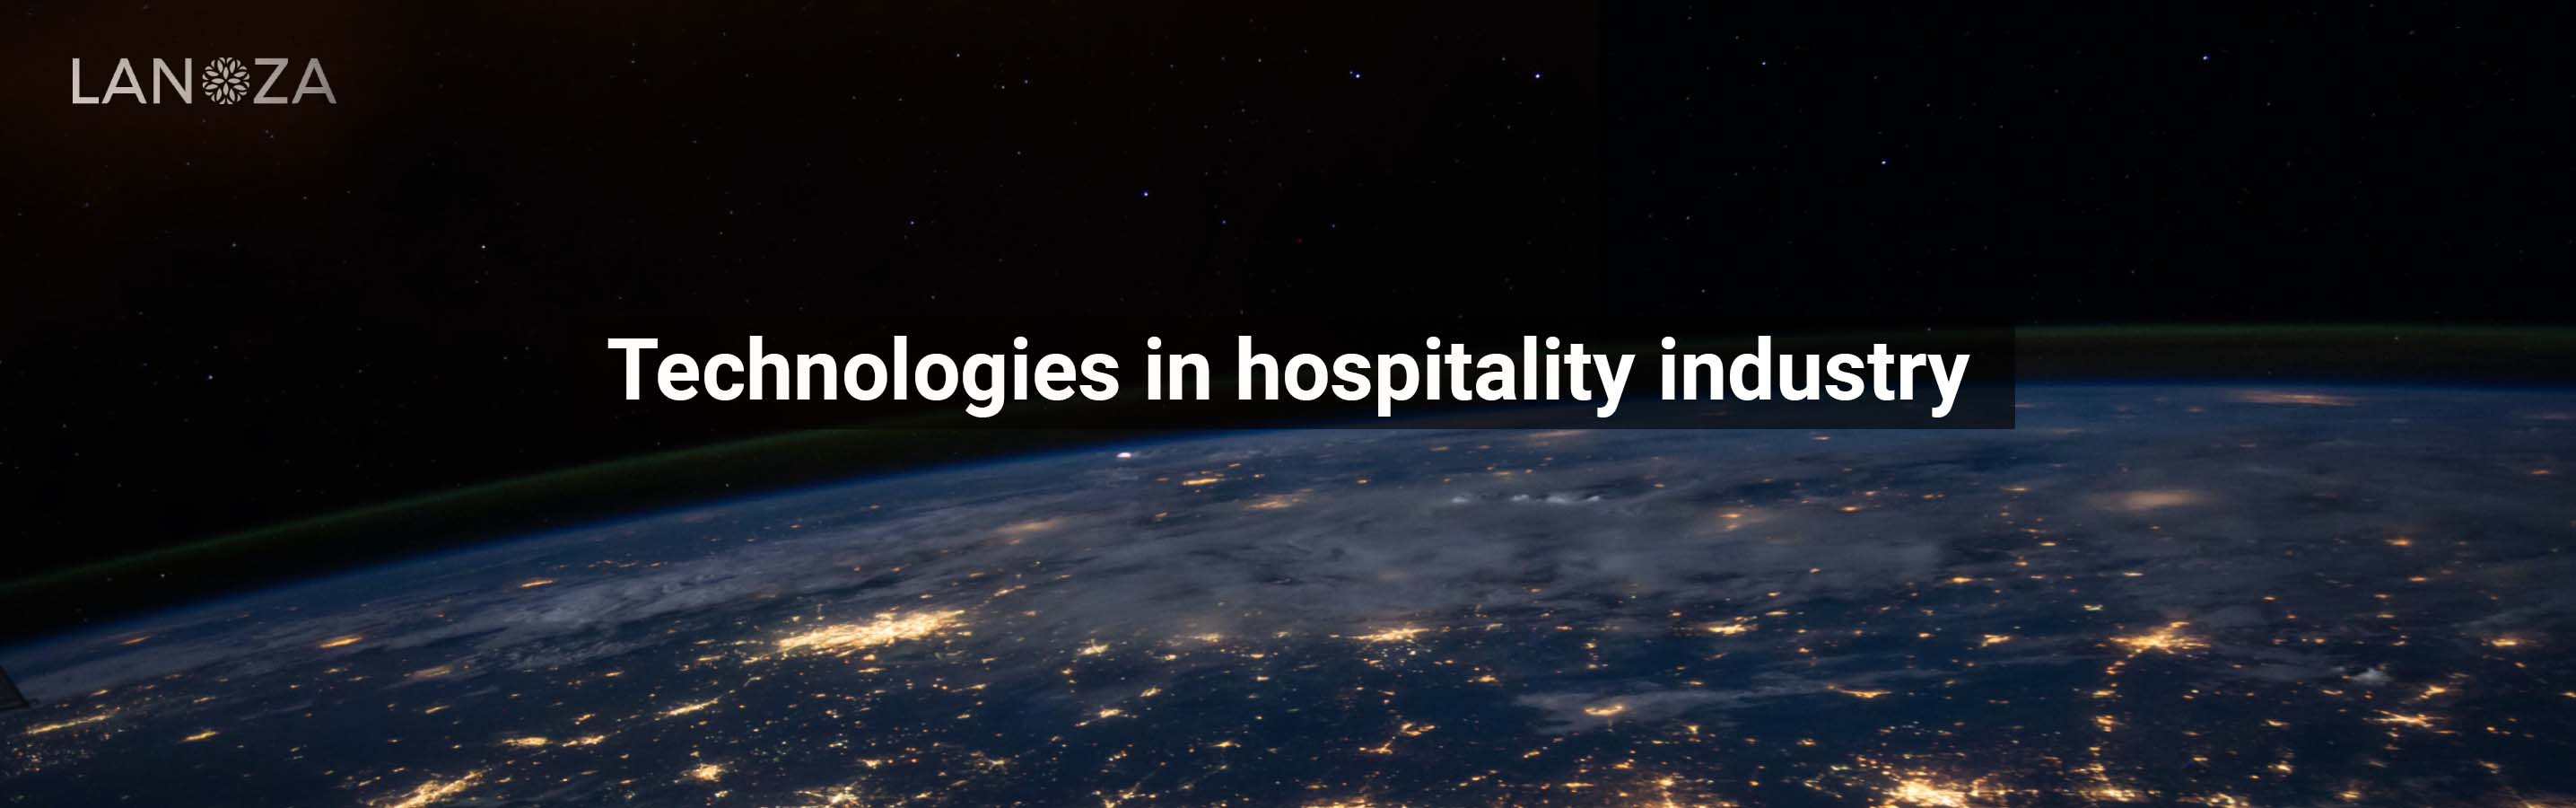 technology-in-the-hospitality-industry